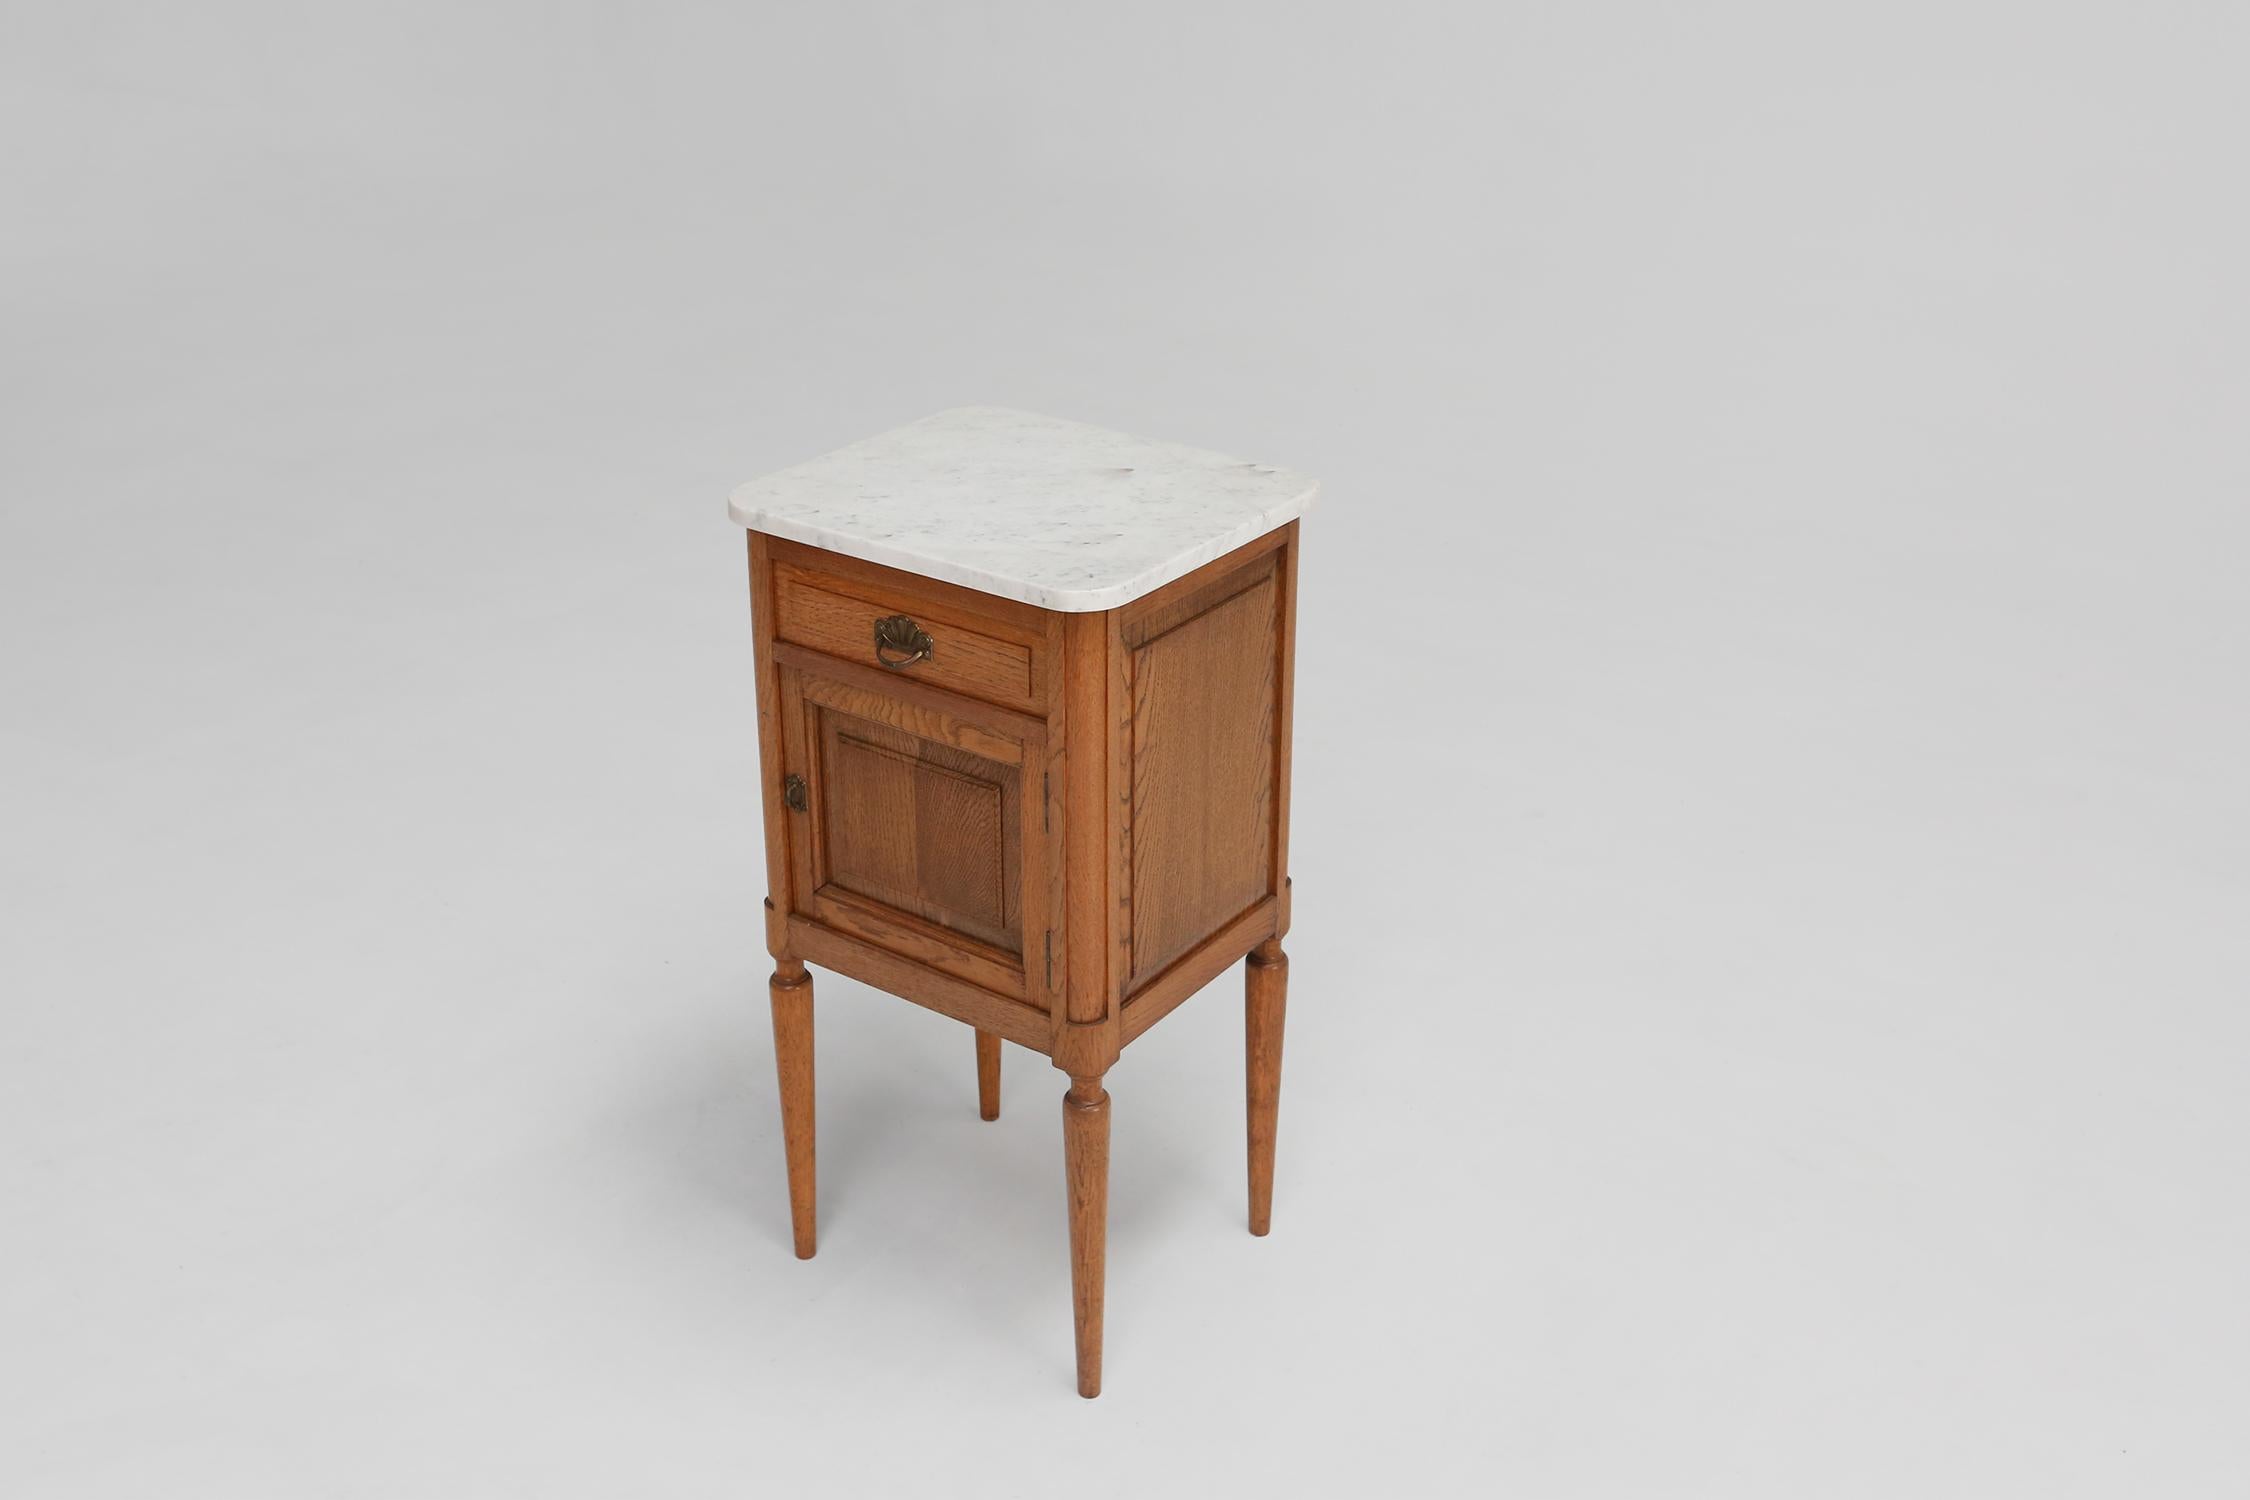 Midcentury nightstand made circa 1950 with a Carrara marble top.